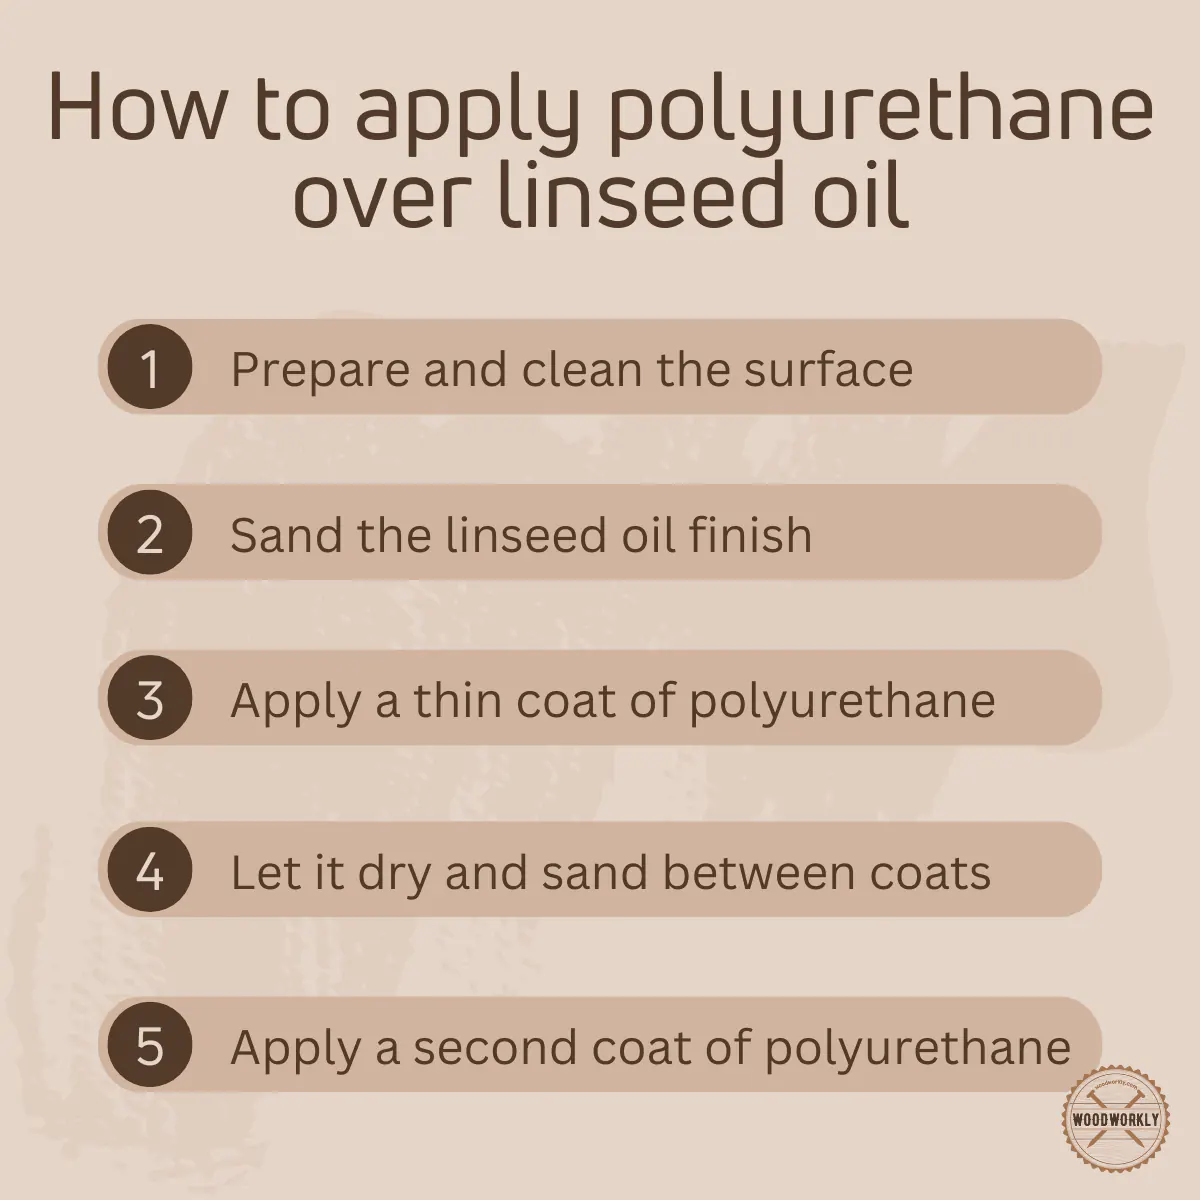 How to apply polyurethane over linseed oil